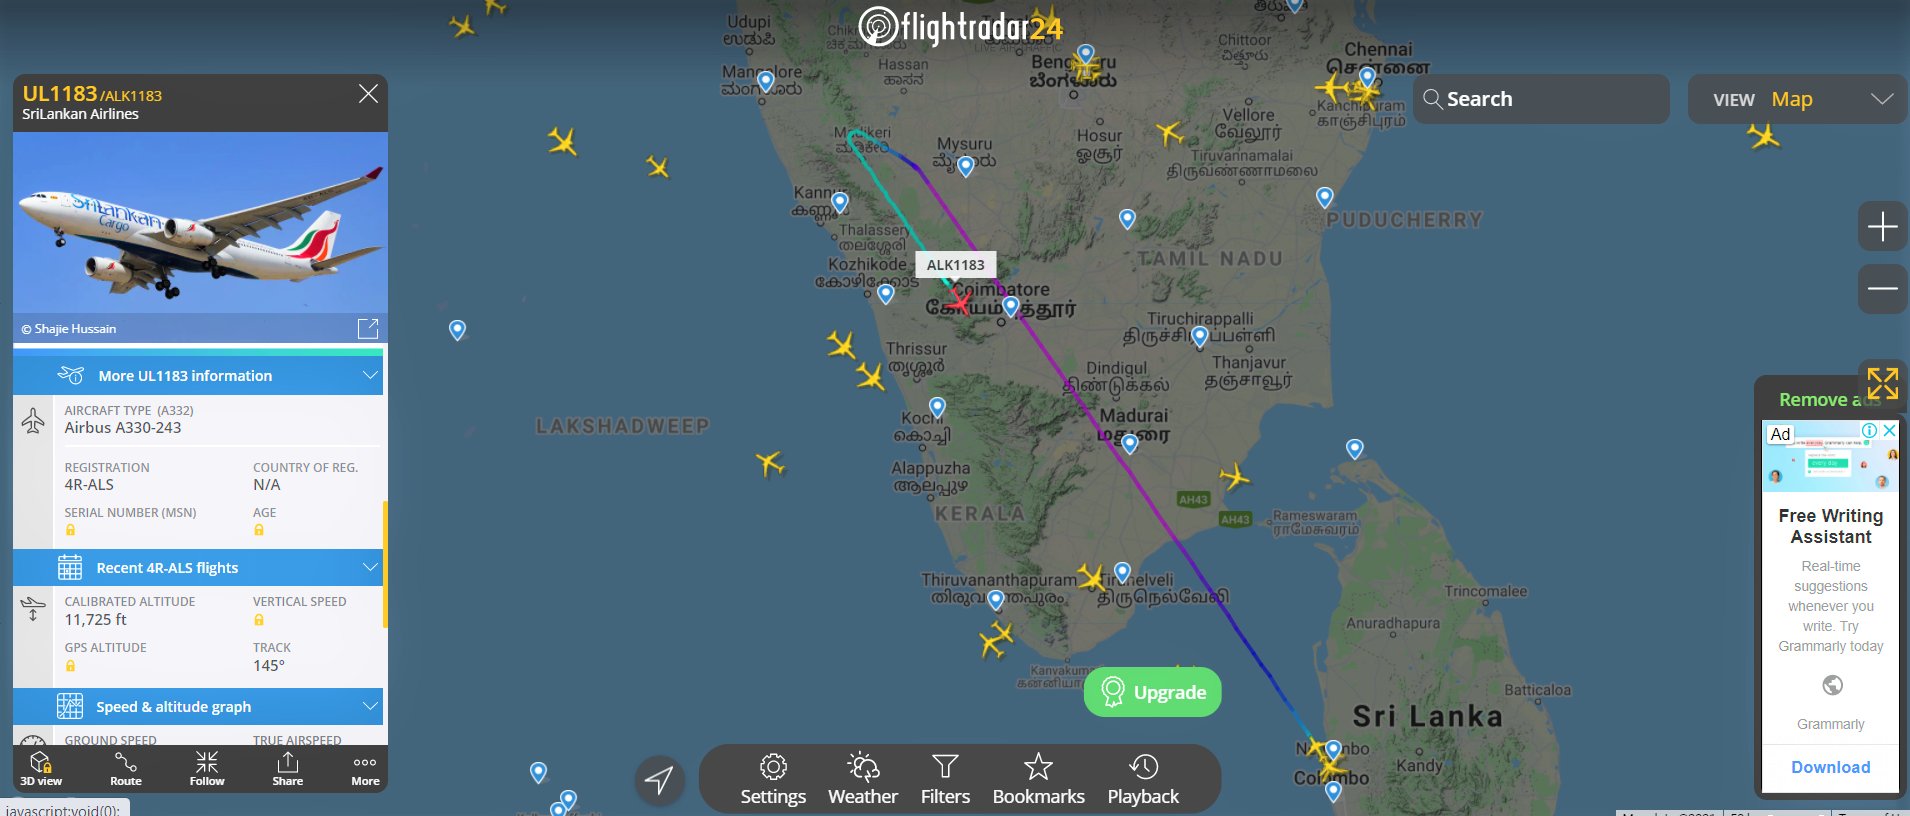 Happening Now - Squawking 7700  Alert !  Srilankan  Freighter Airbus A330-243  (4R-ALS) making  Air turn back  now  on  Flight # UL1183 ( Colombo-Karachi)